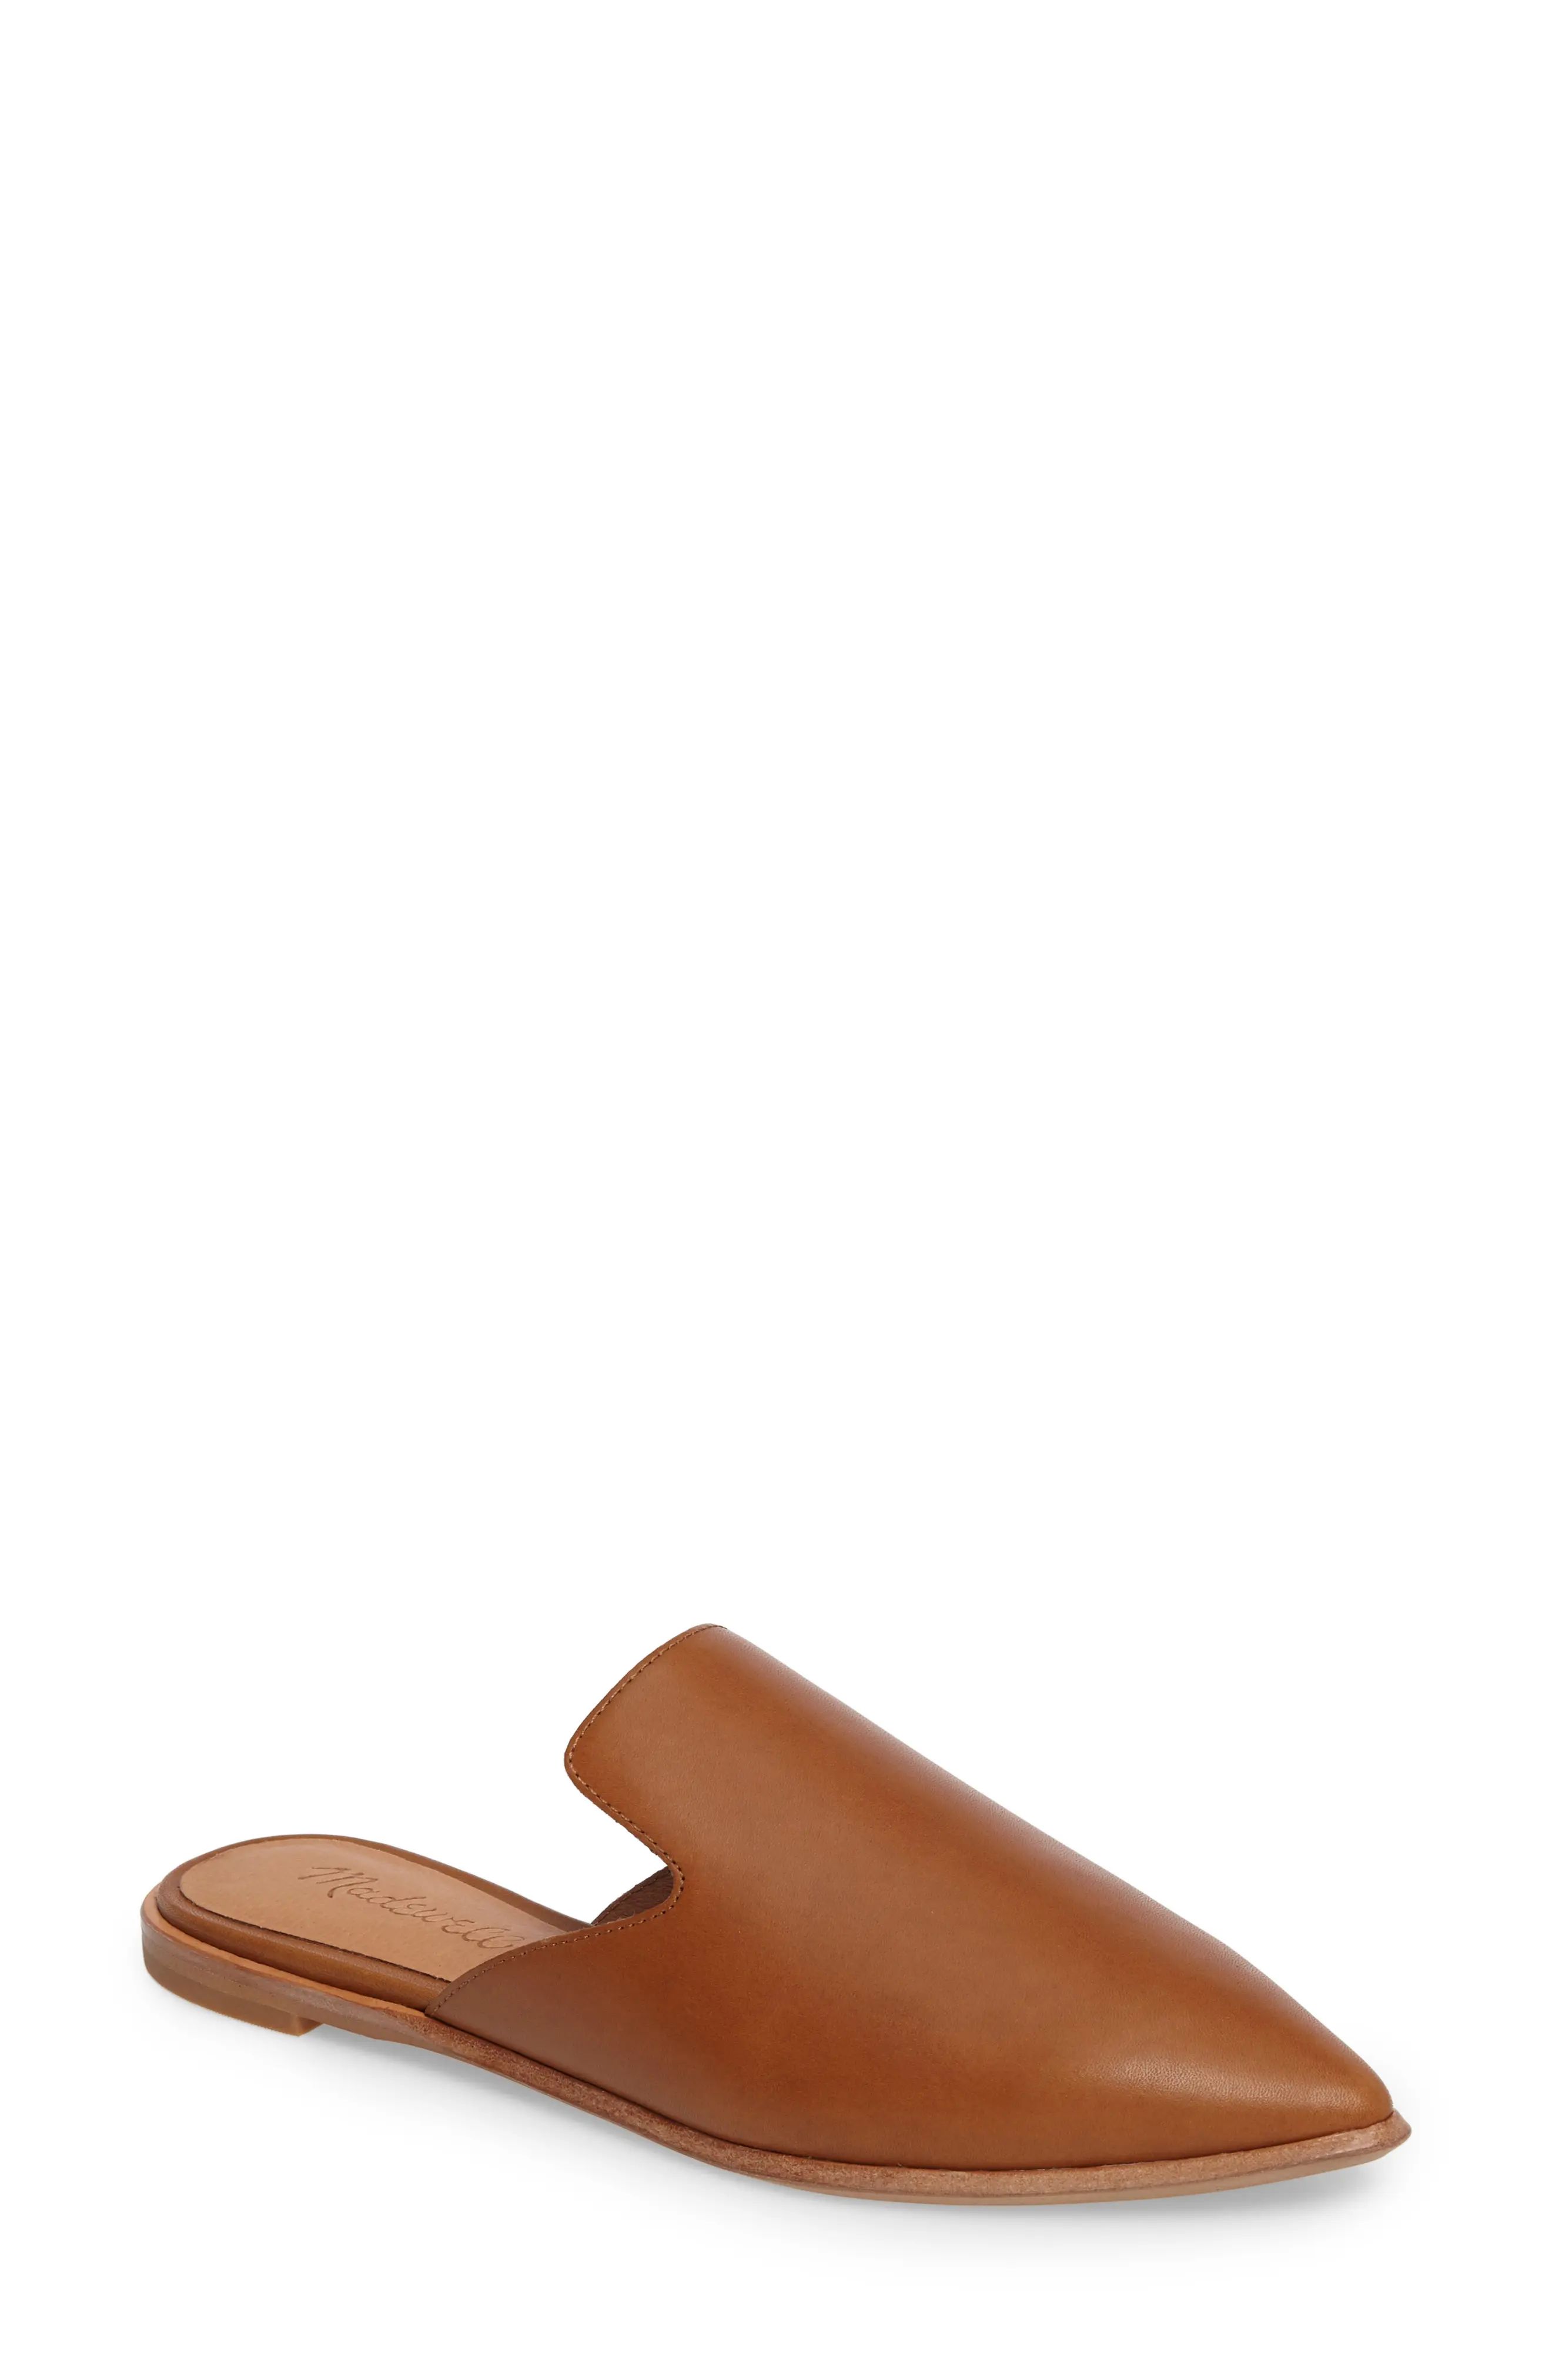 Madewell The Gemma Mule, Size 5.5 in English Saddle Leather at Nordstrom | Nordstrom